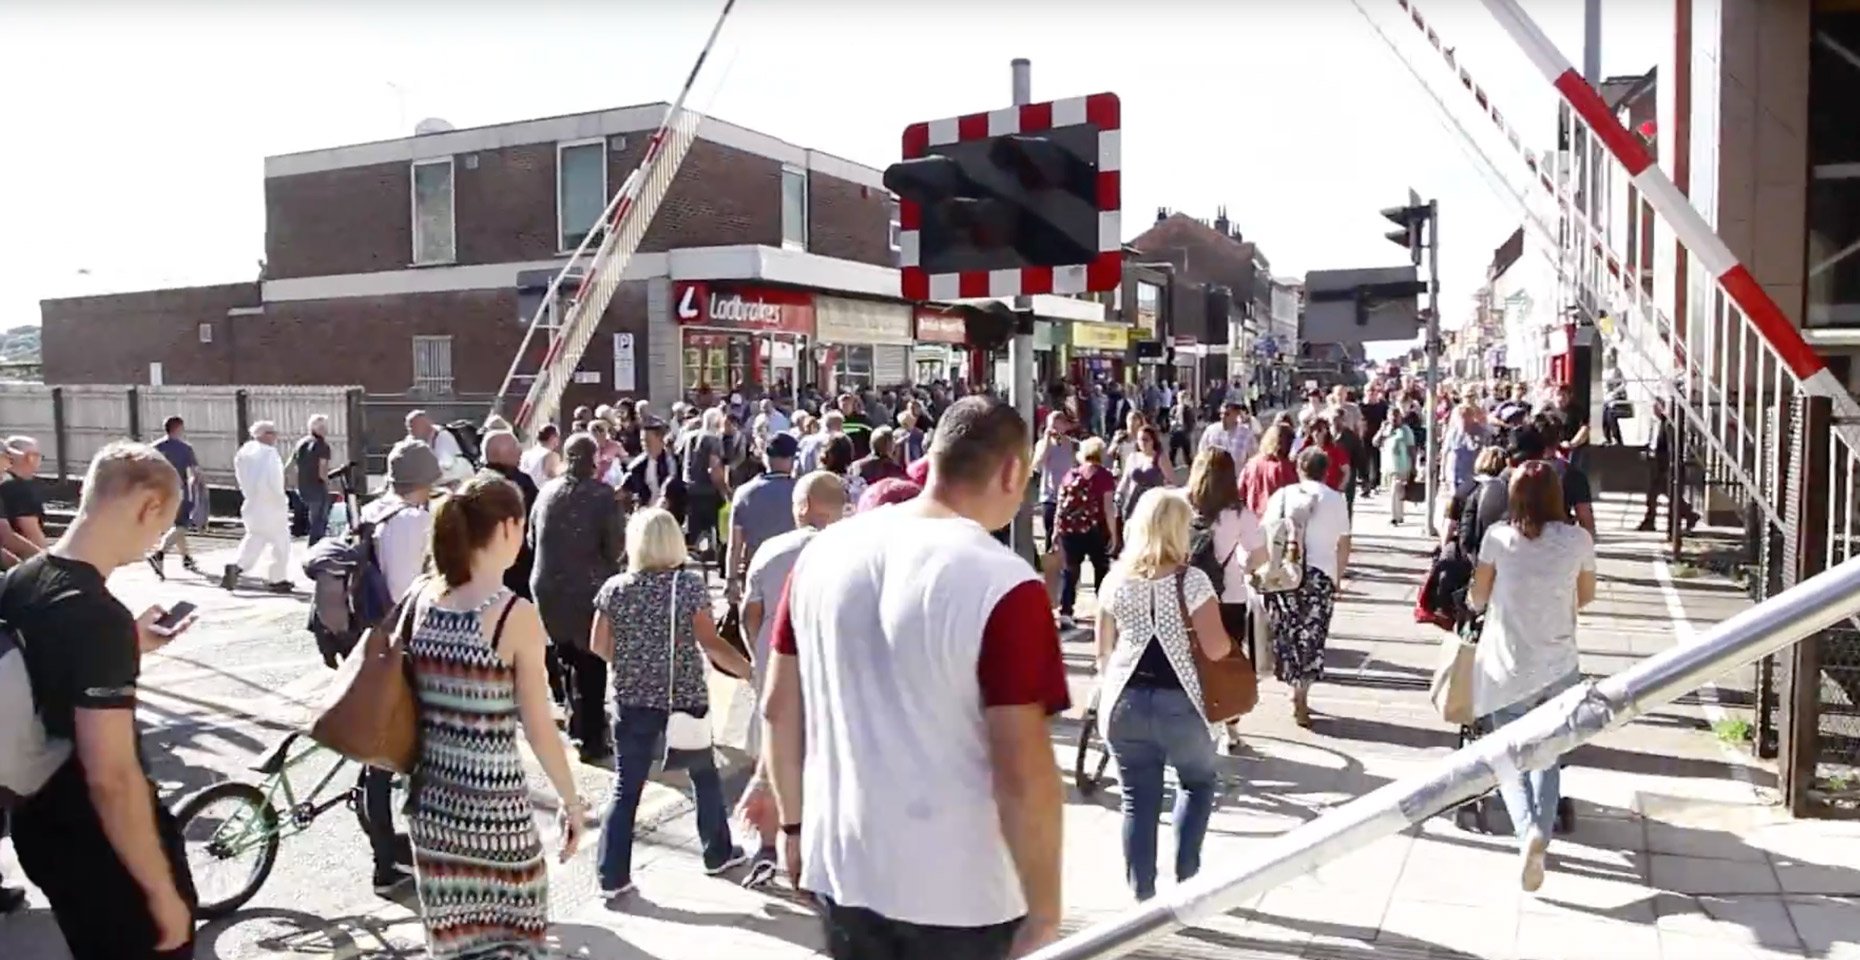 Swarms of people were filmed waiting at the crossing, rather than using the new £12 million bridge.